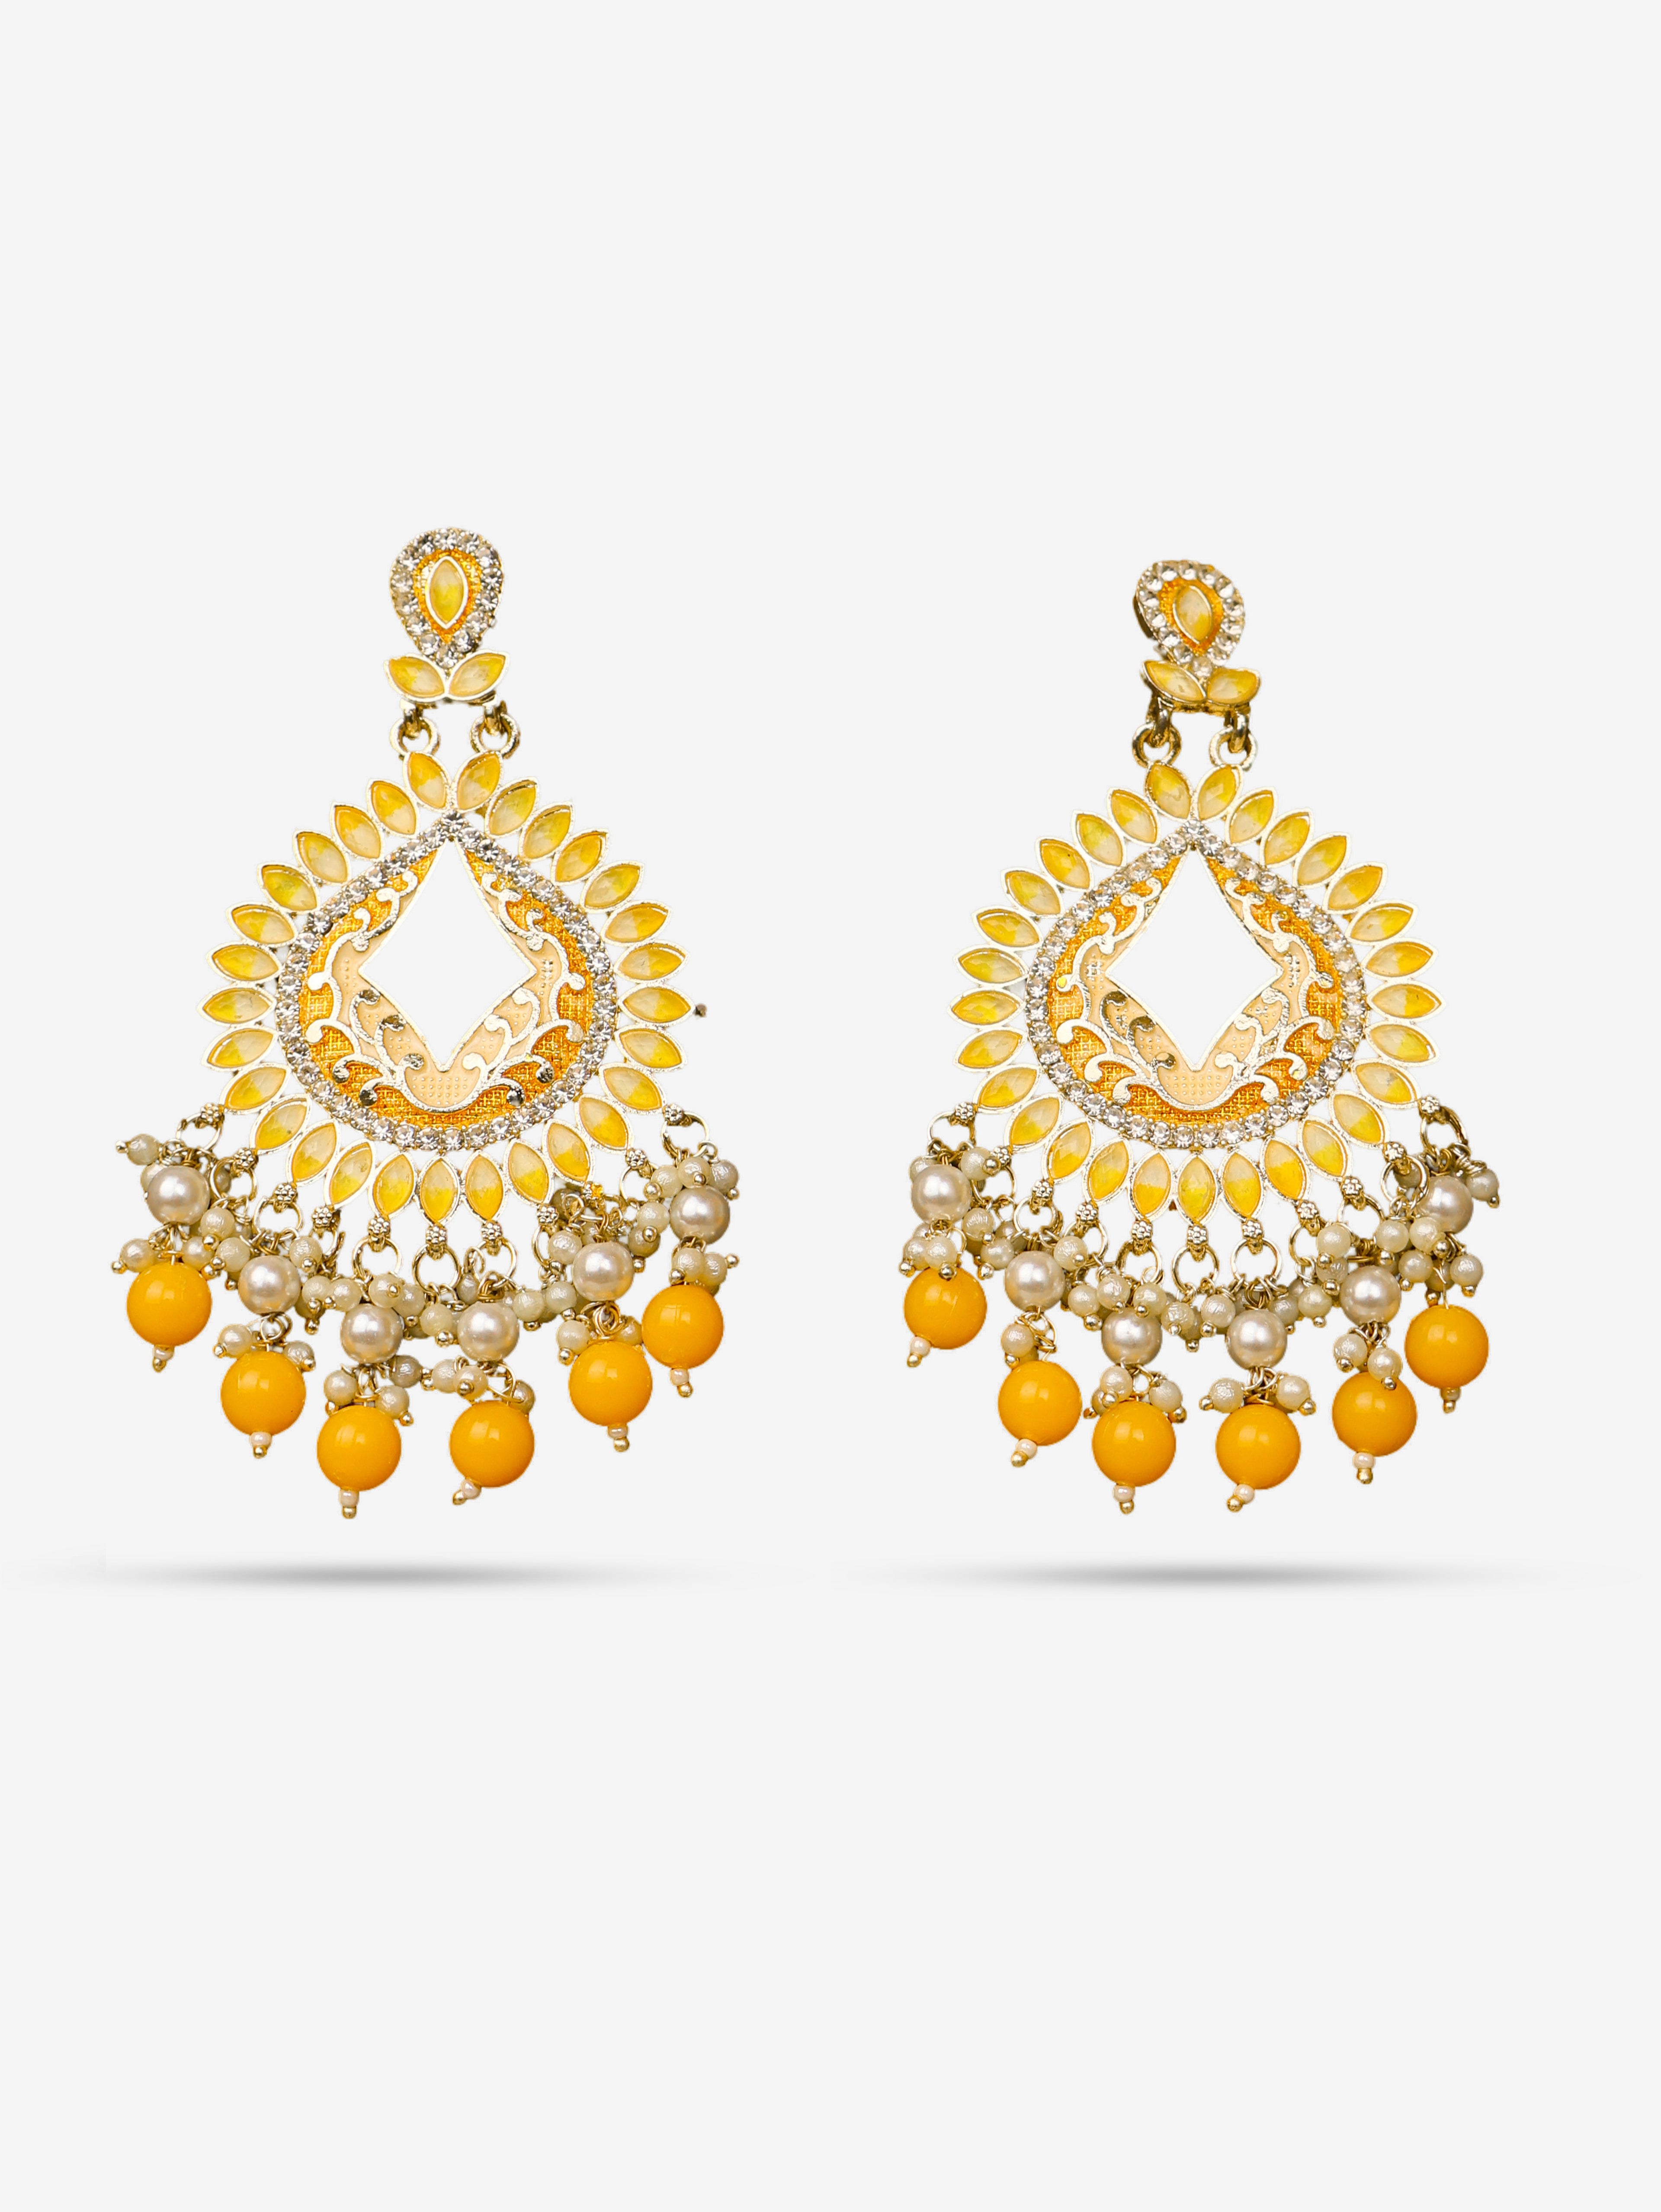 Gold-Toned &amp; Chandbali Earrings with Crystals and Pearls for Women by Shreekama Yellow Fashion Jewelry for Party Festival Wedding Occasion in Noida